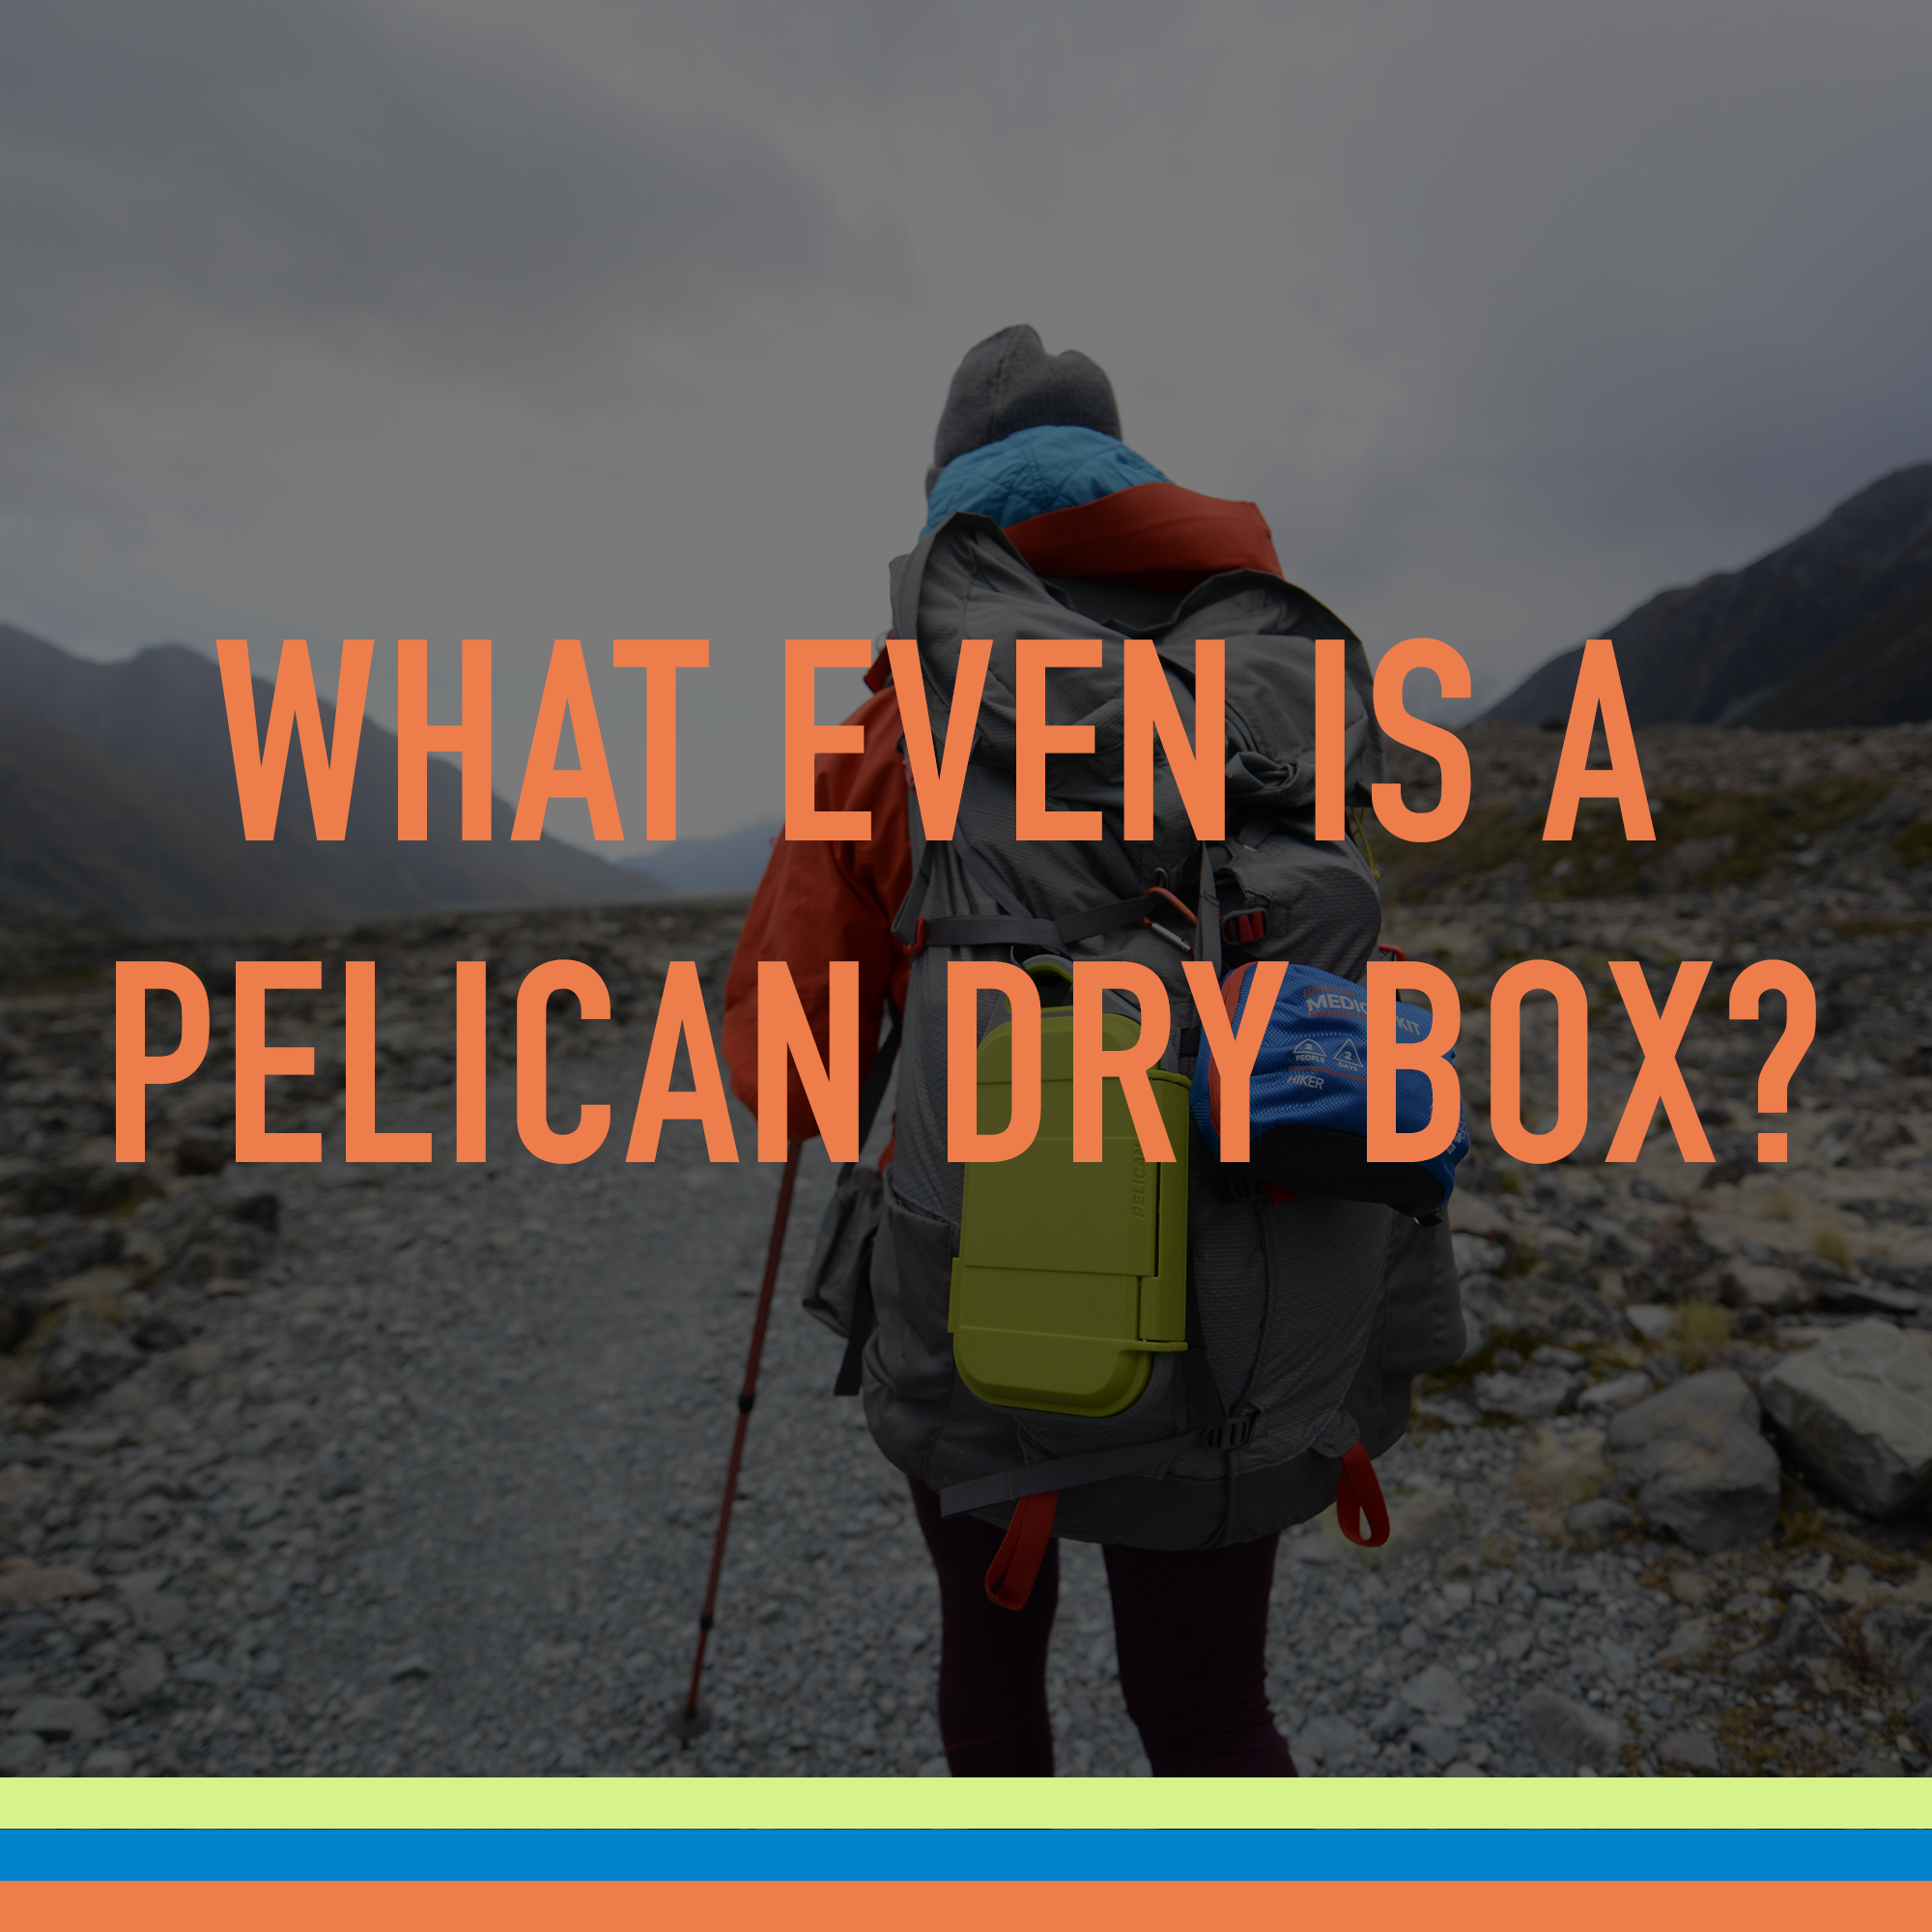 What Even Is a Pelican Dry Box?